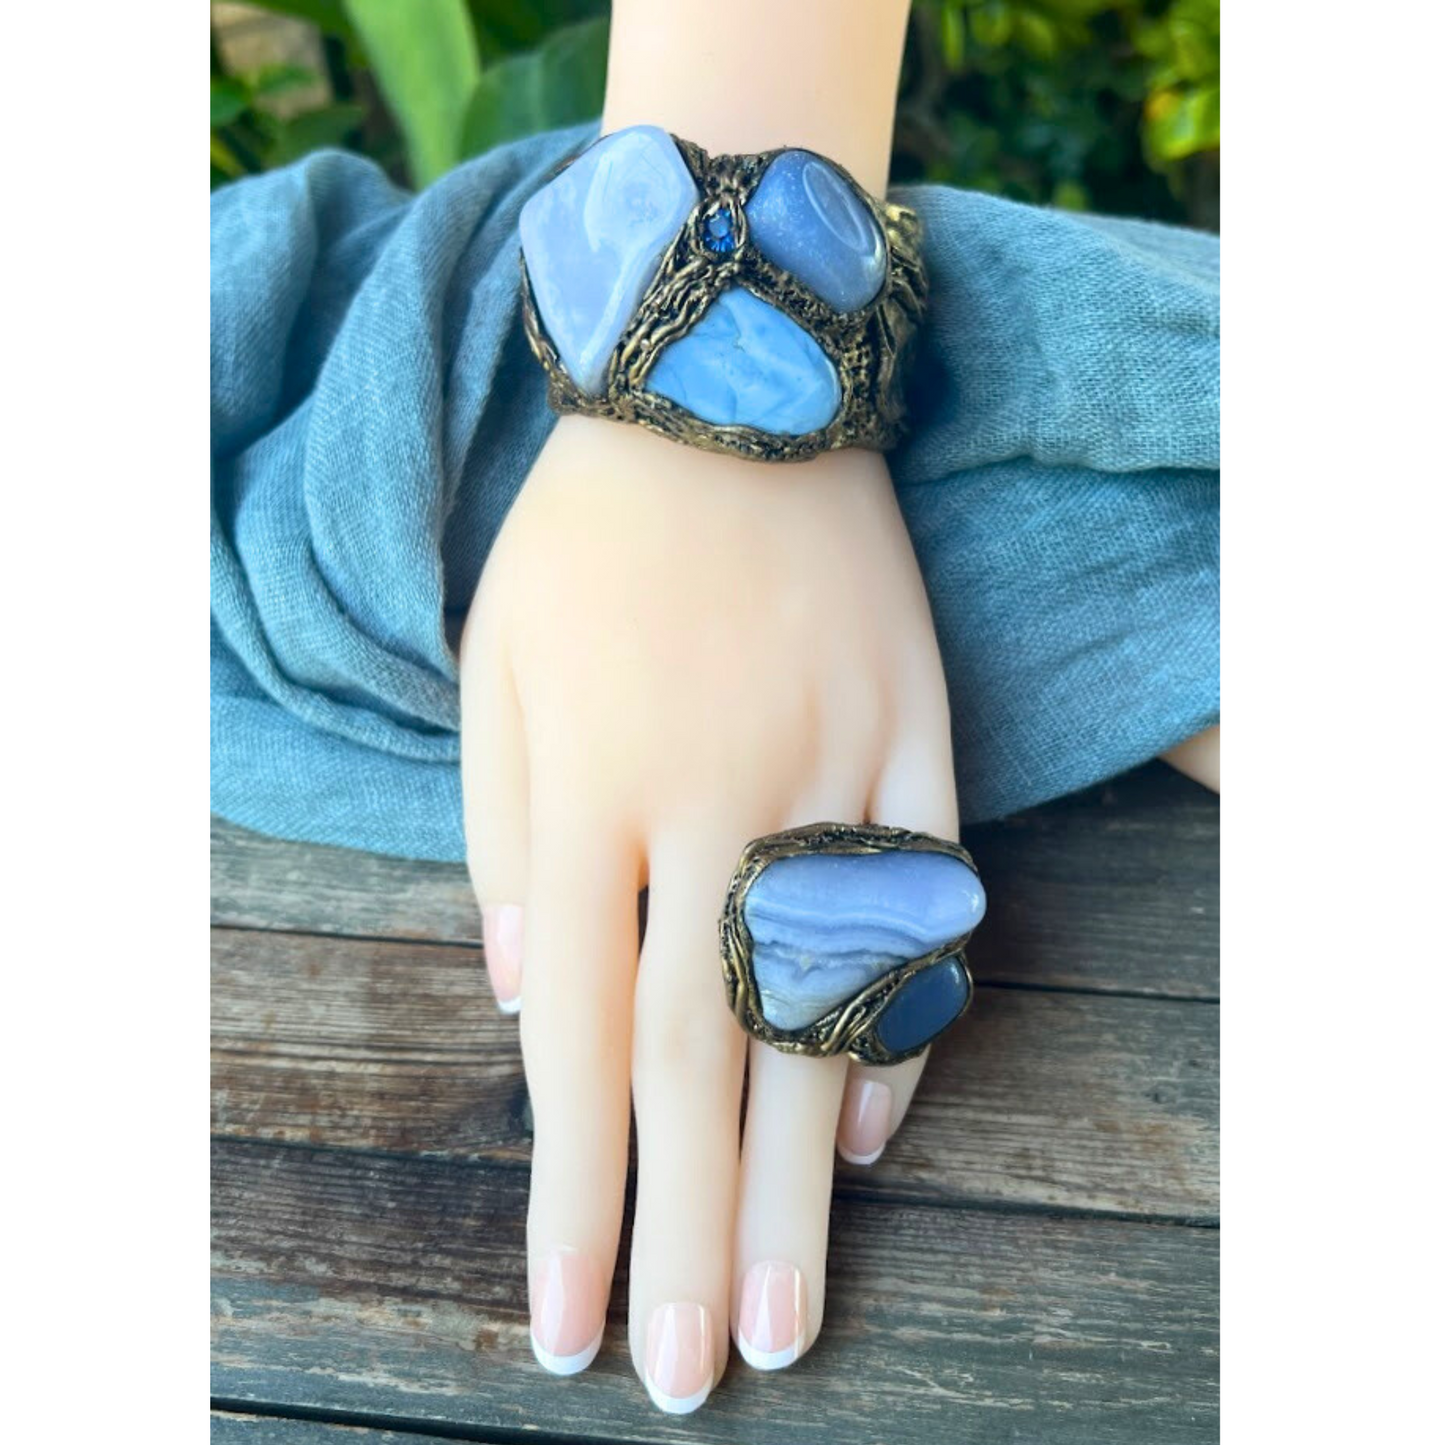 Chunky Blue Lace Agate and Chalcedony Large Stone Ring, Statement Huge Oversized Cocktail Ring